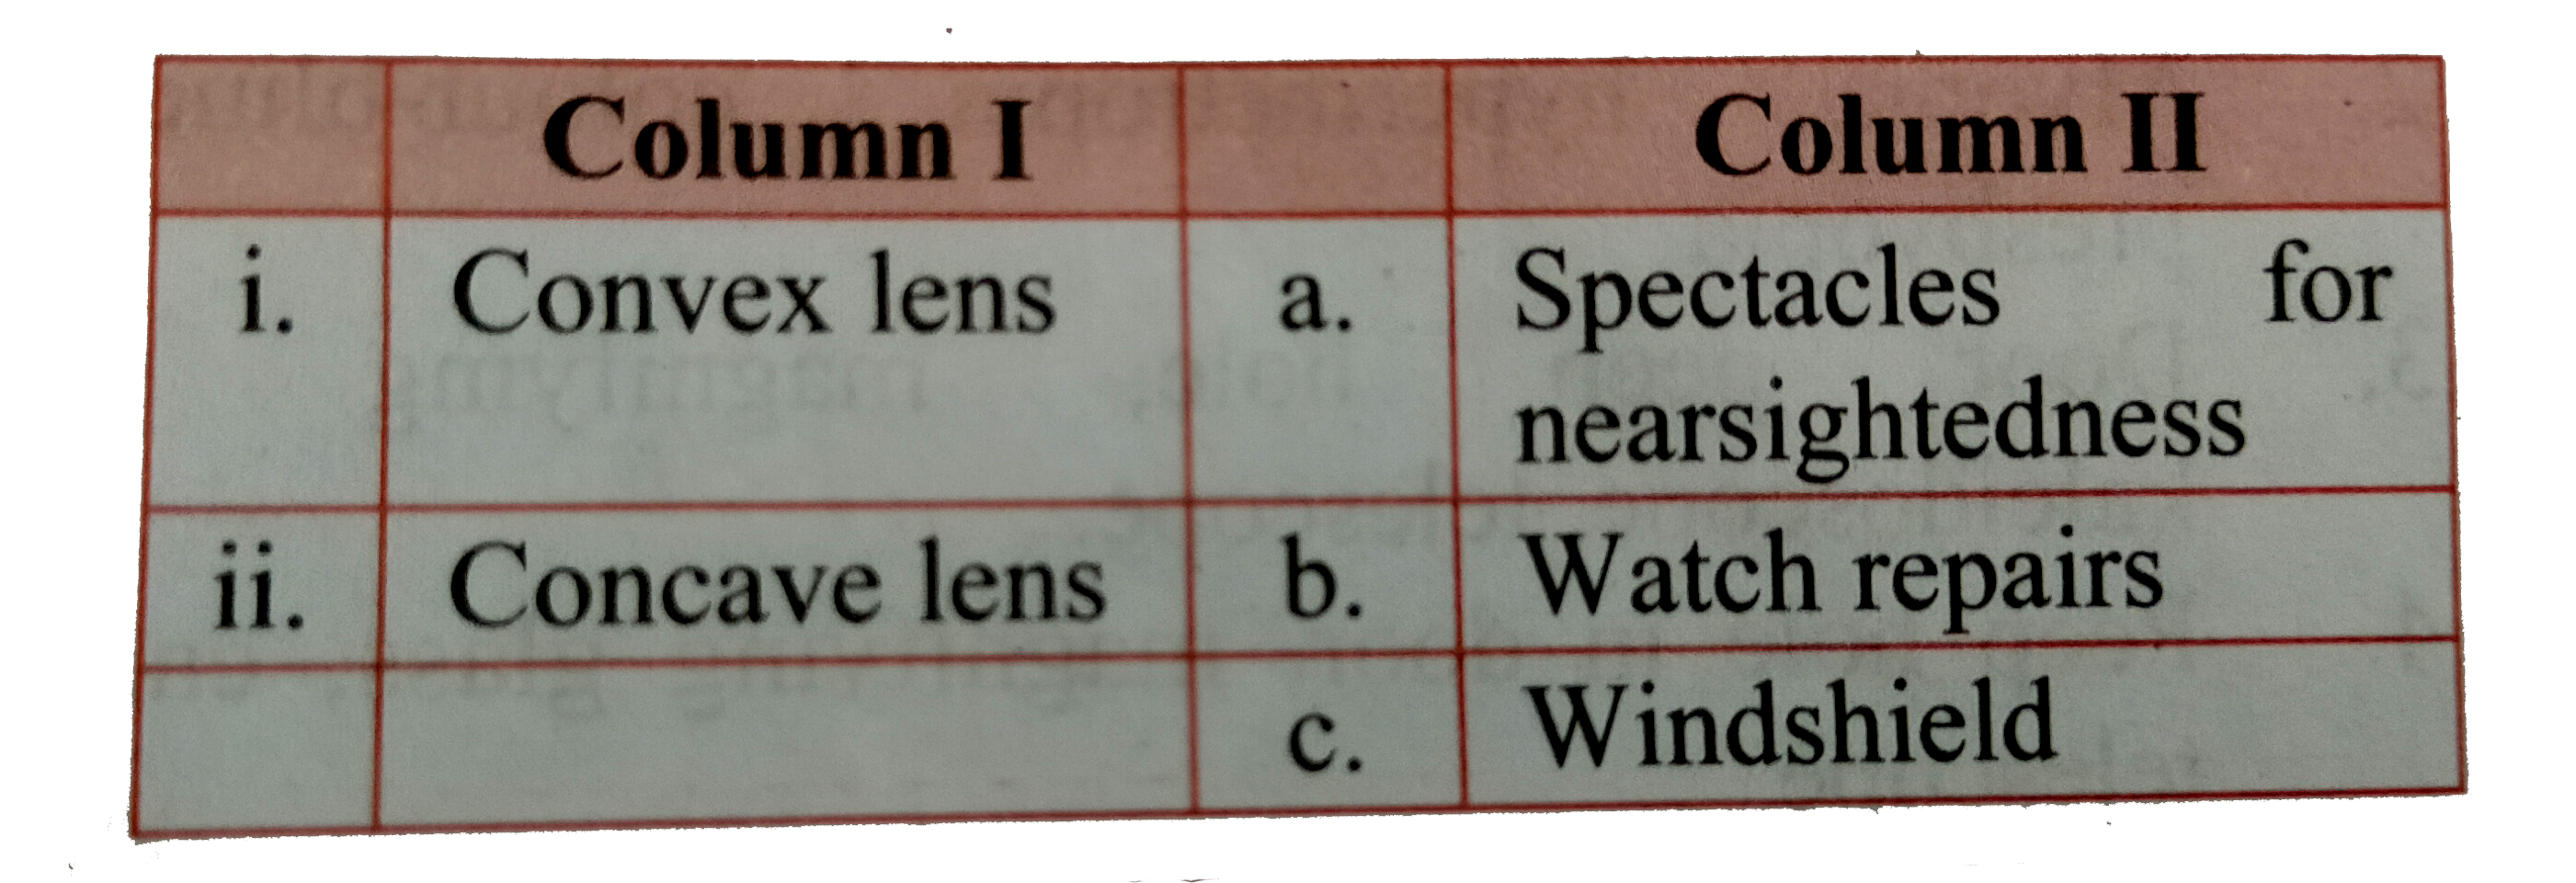 Match the type of lens given in column I with their uses given in column II.